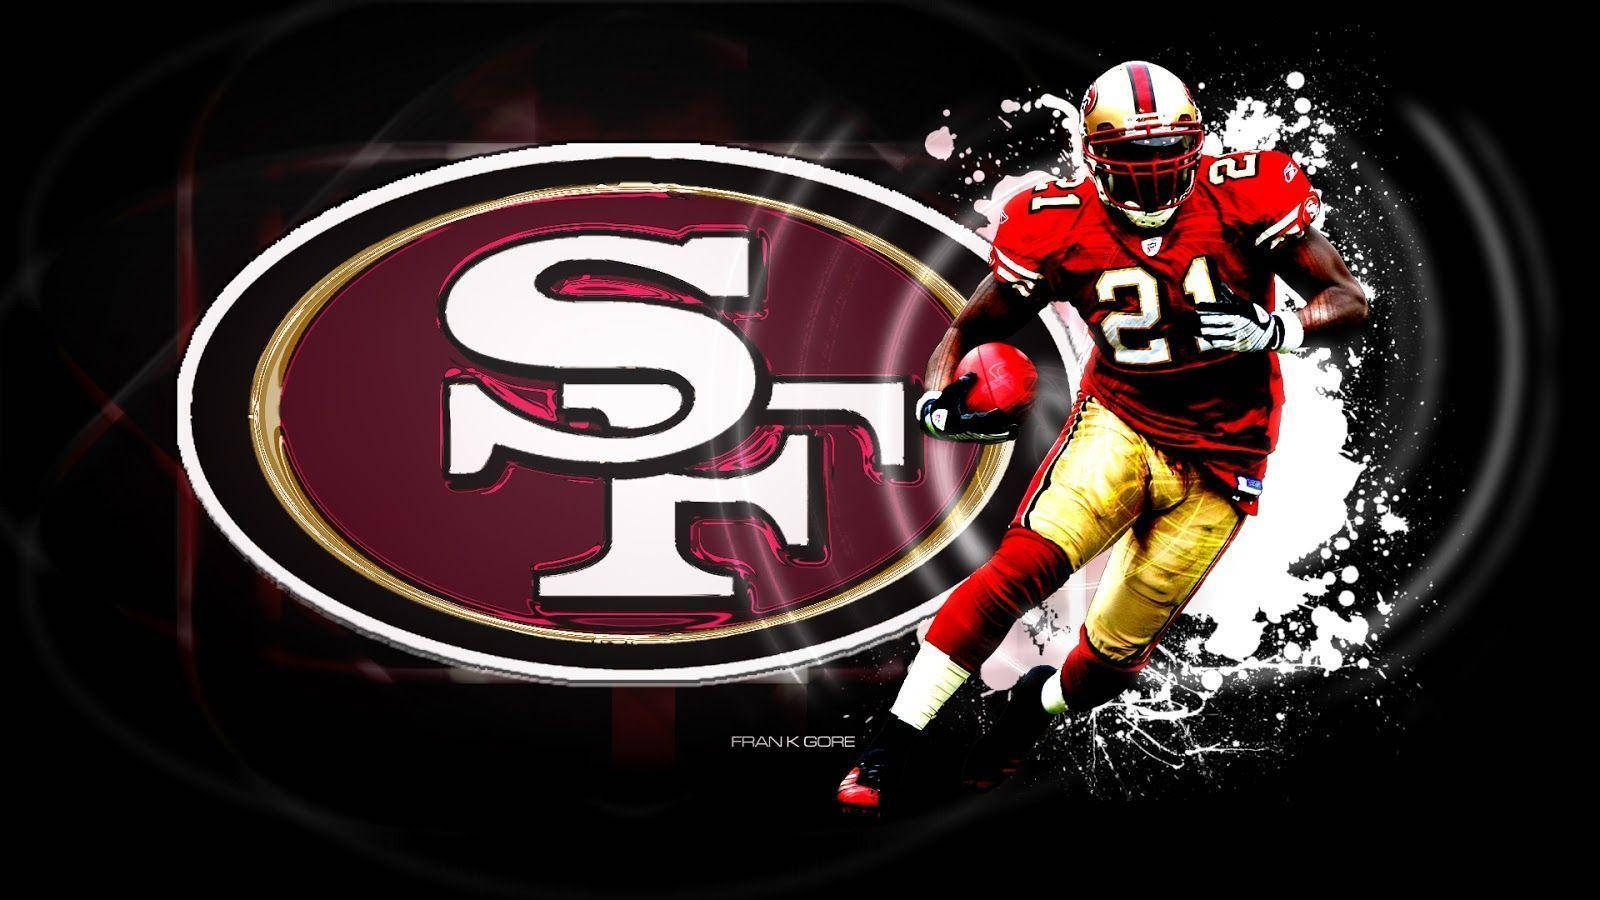 Frank Gore 49ers Poster Background